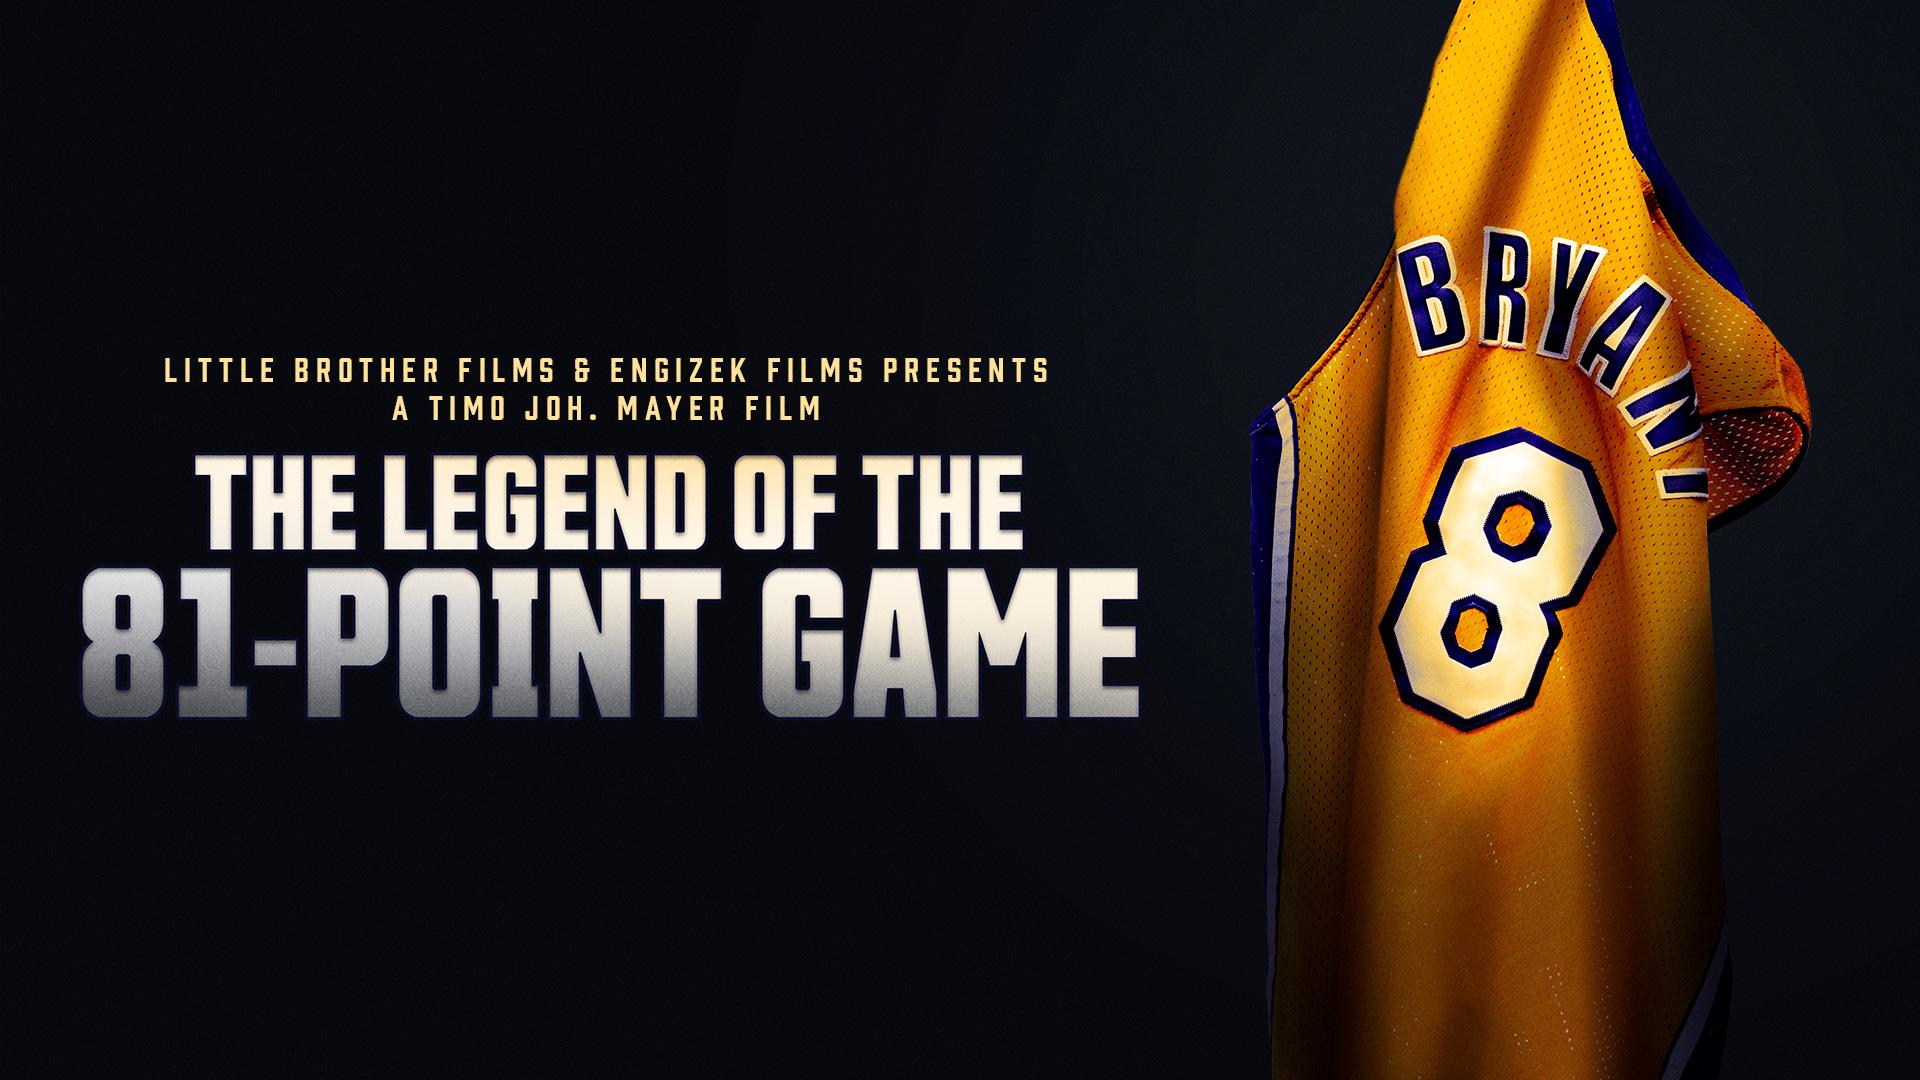 The Legend of the 81-Point Game